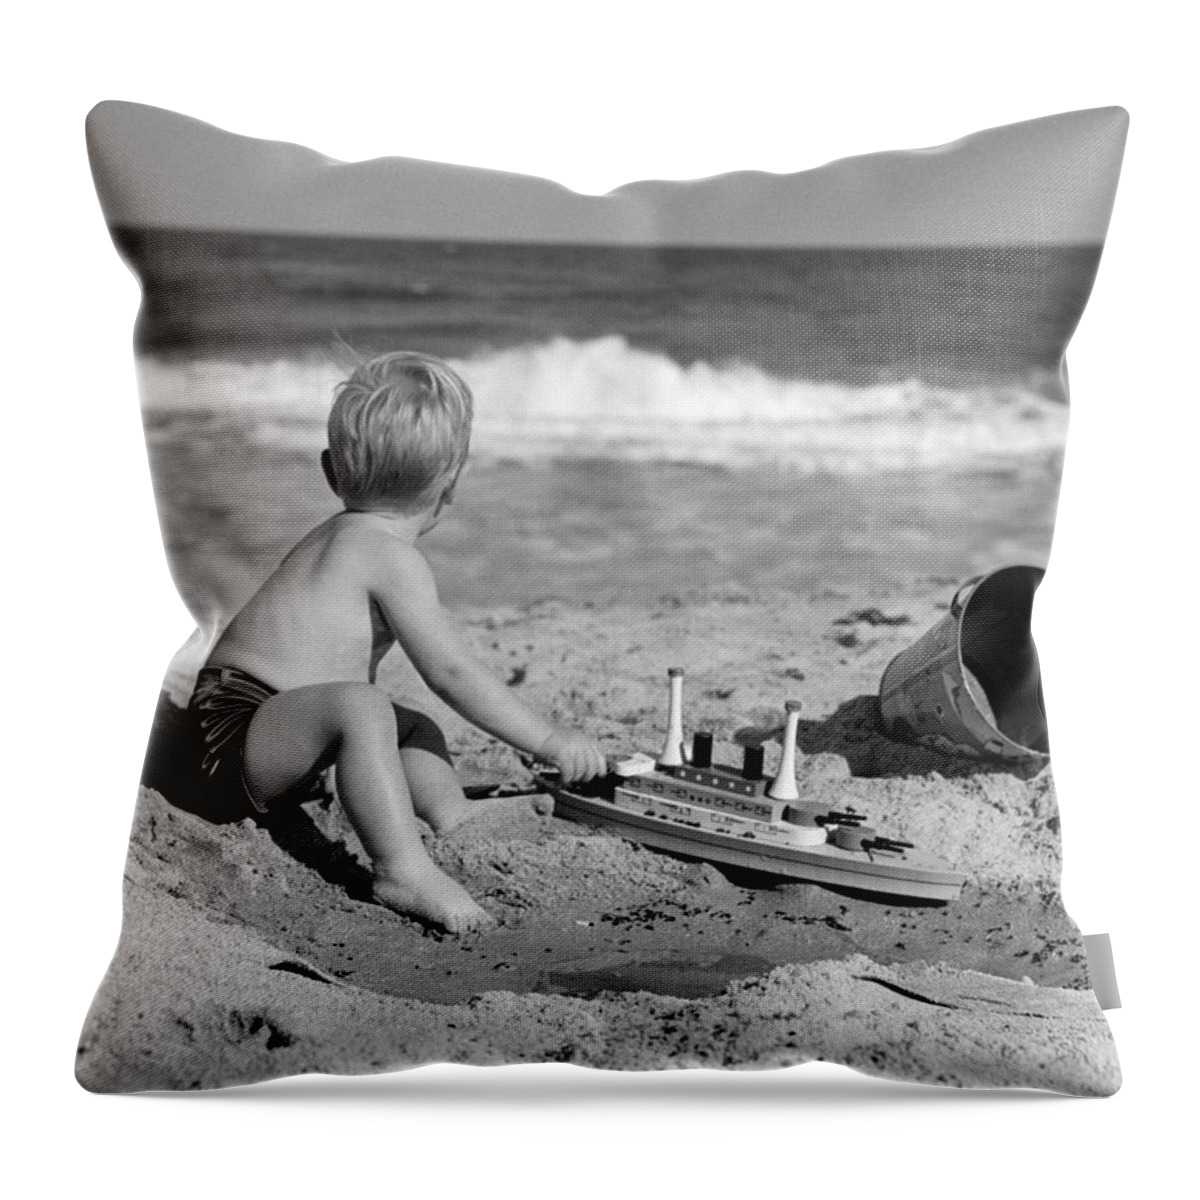 1950s Throw Pillow featuring the photograph Boy Playing At The Beach, C.1950s by H Armstrong Roberts and ClassicStock